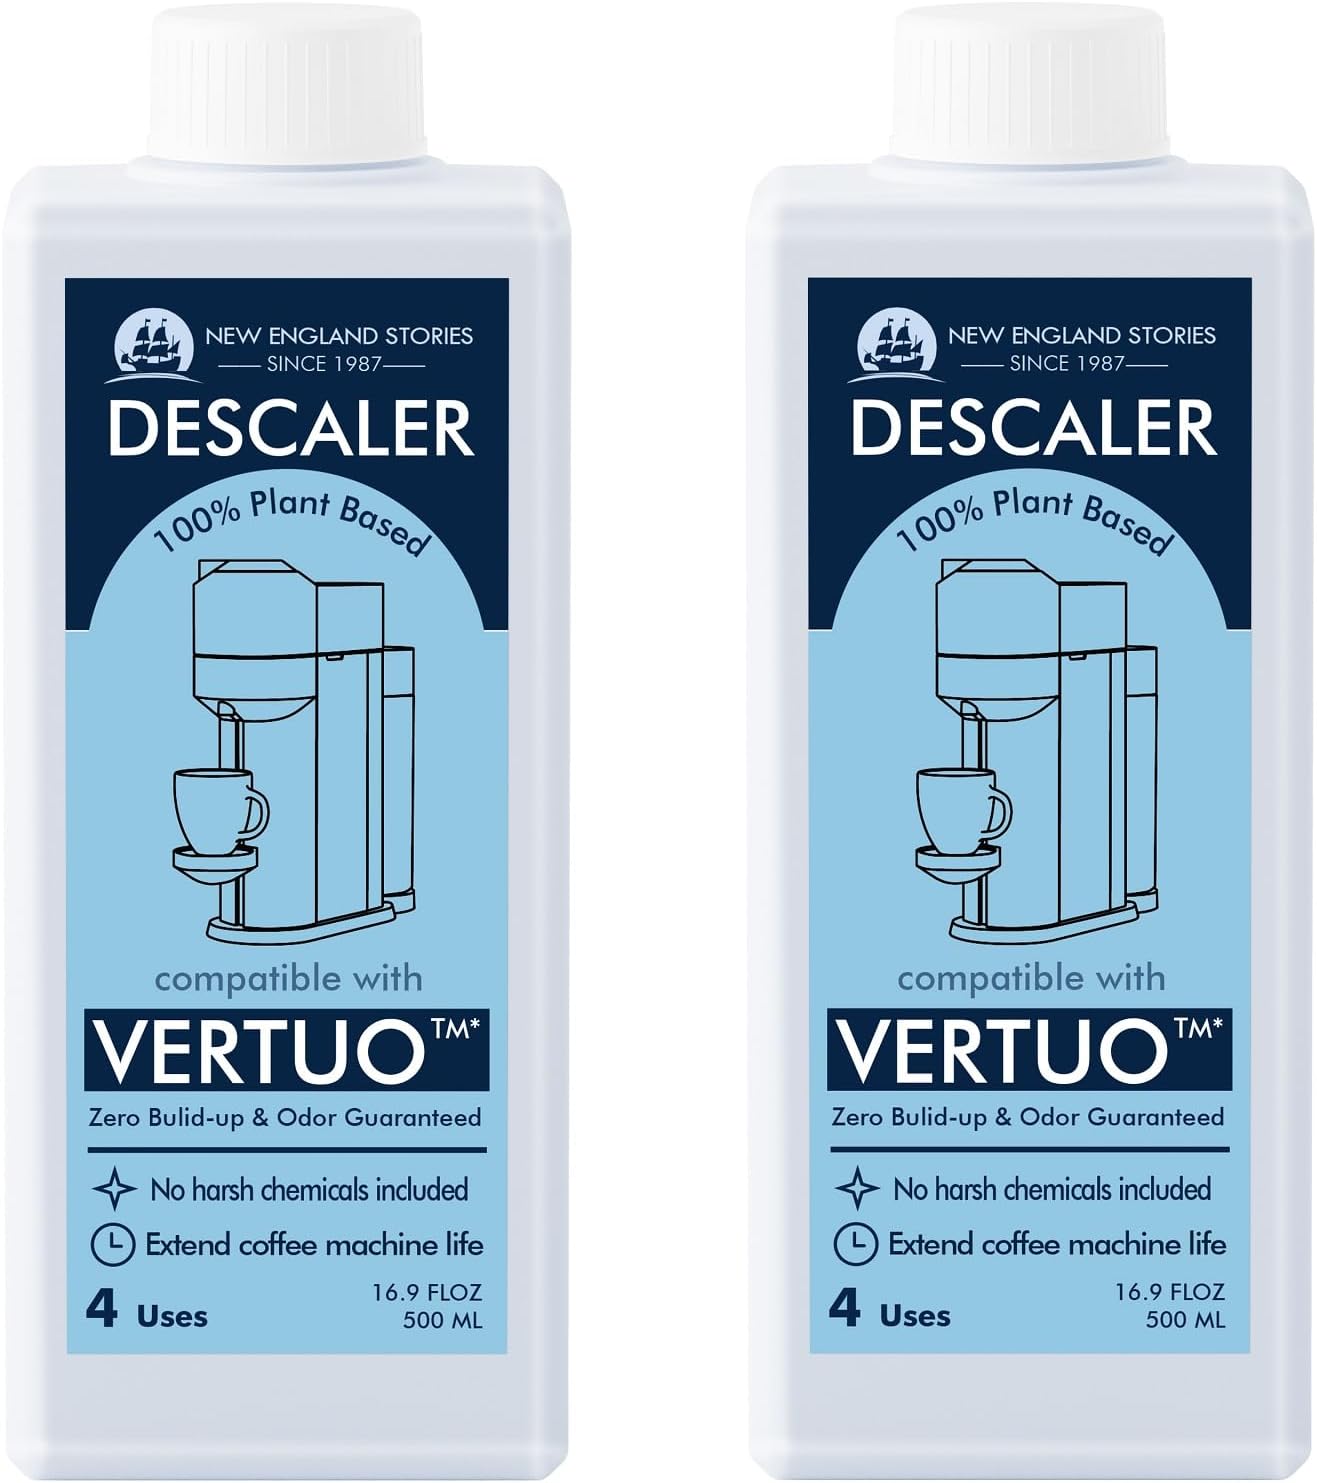 This company makes Descaling Solution for other products, and I have used it before. I strongly suspect that, even though they mention specific products, it' the same solution for all of them. Why wouldn't it be The solution provides the same chemical reaction to remove calcium carbonate and other hard water impurities. I suspect they 